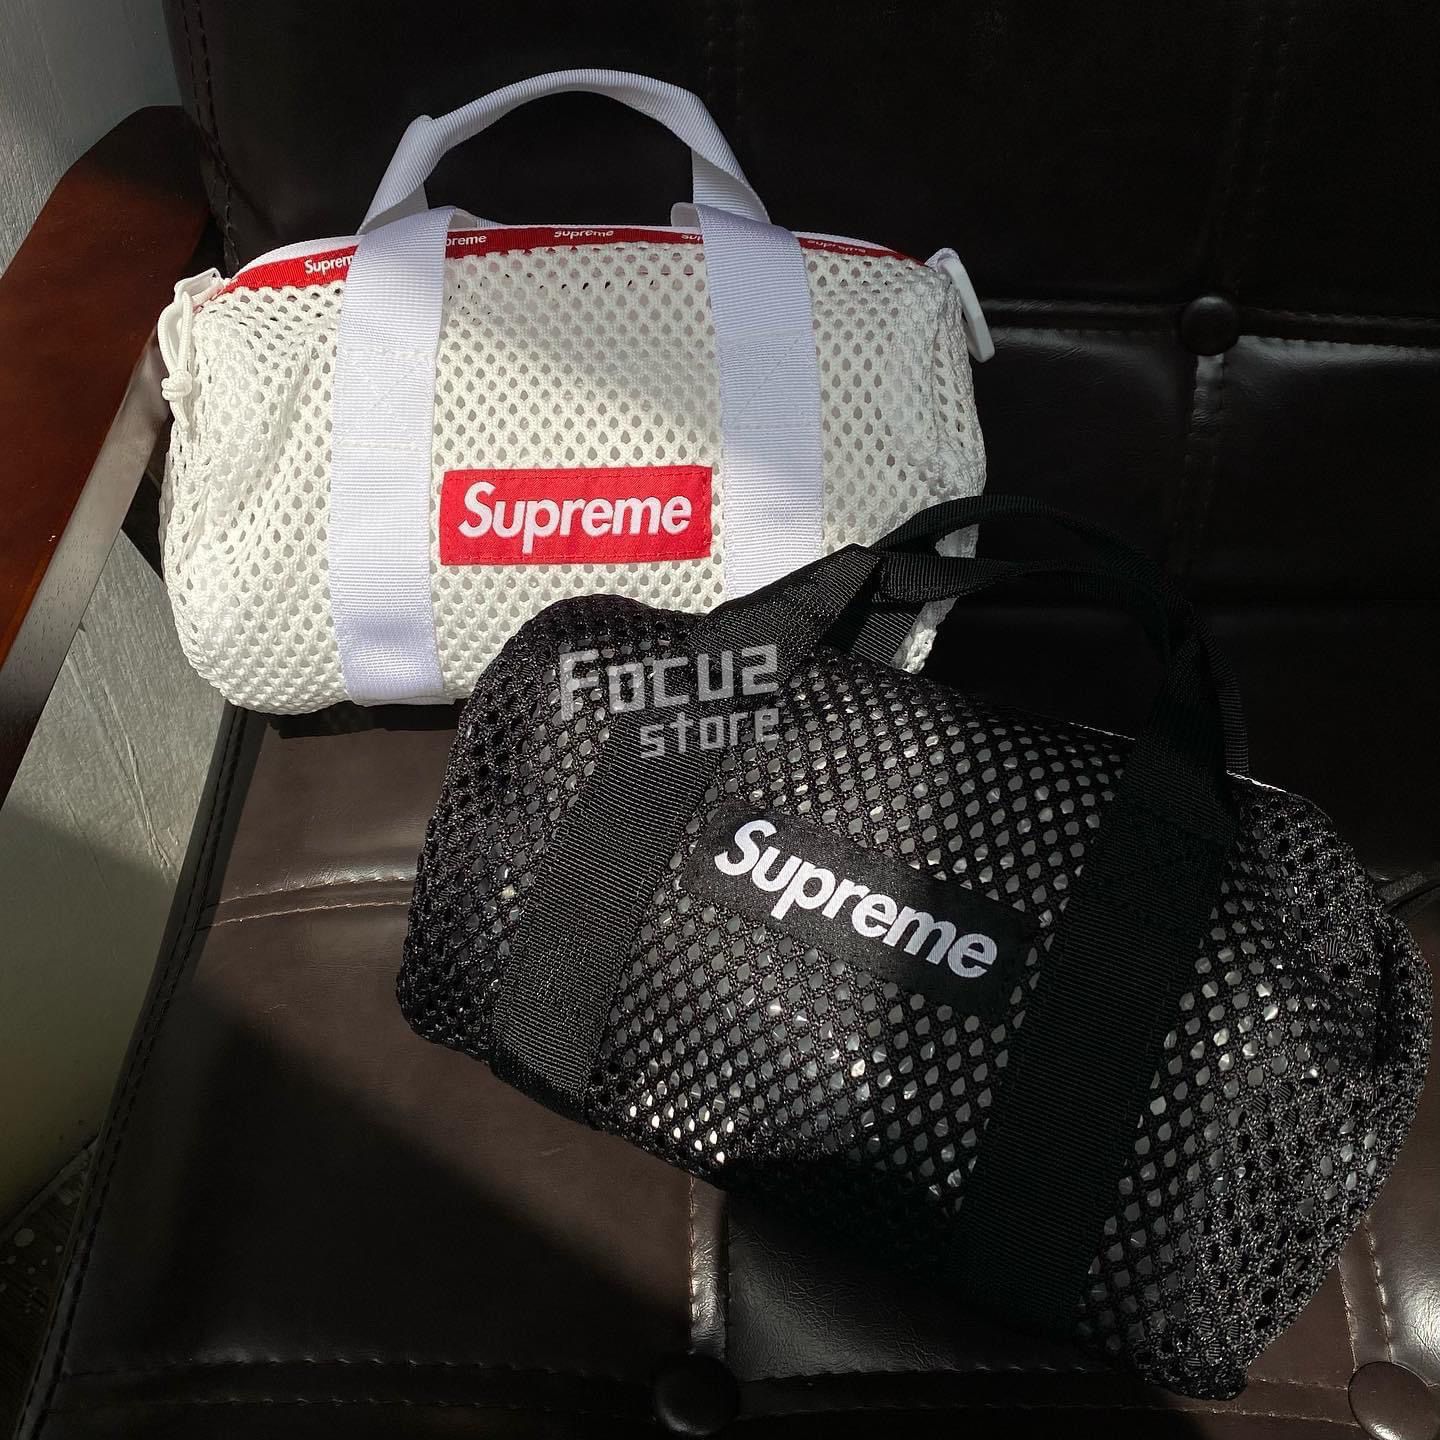 Supreme Mini Duffle Bag for Sale in Los Angeles, CA - OfferUp